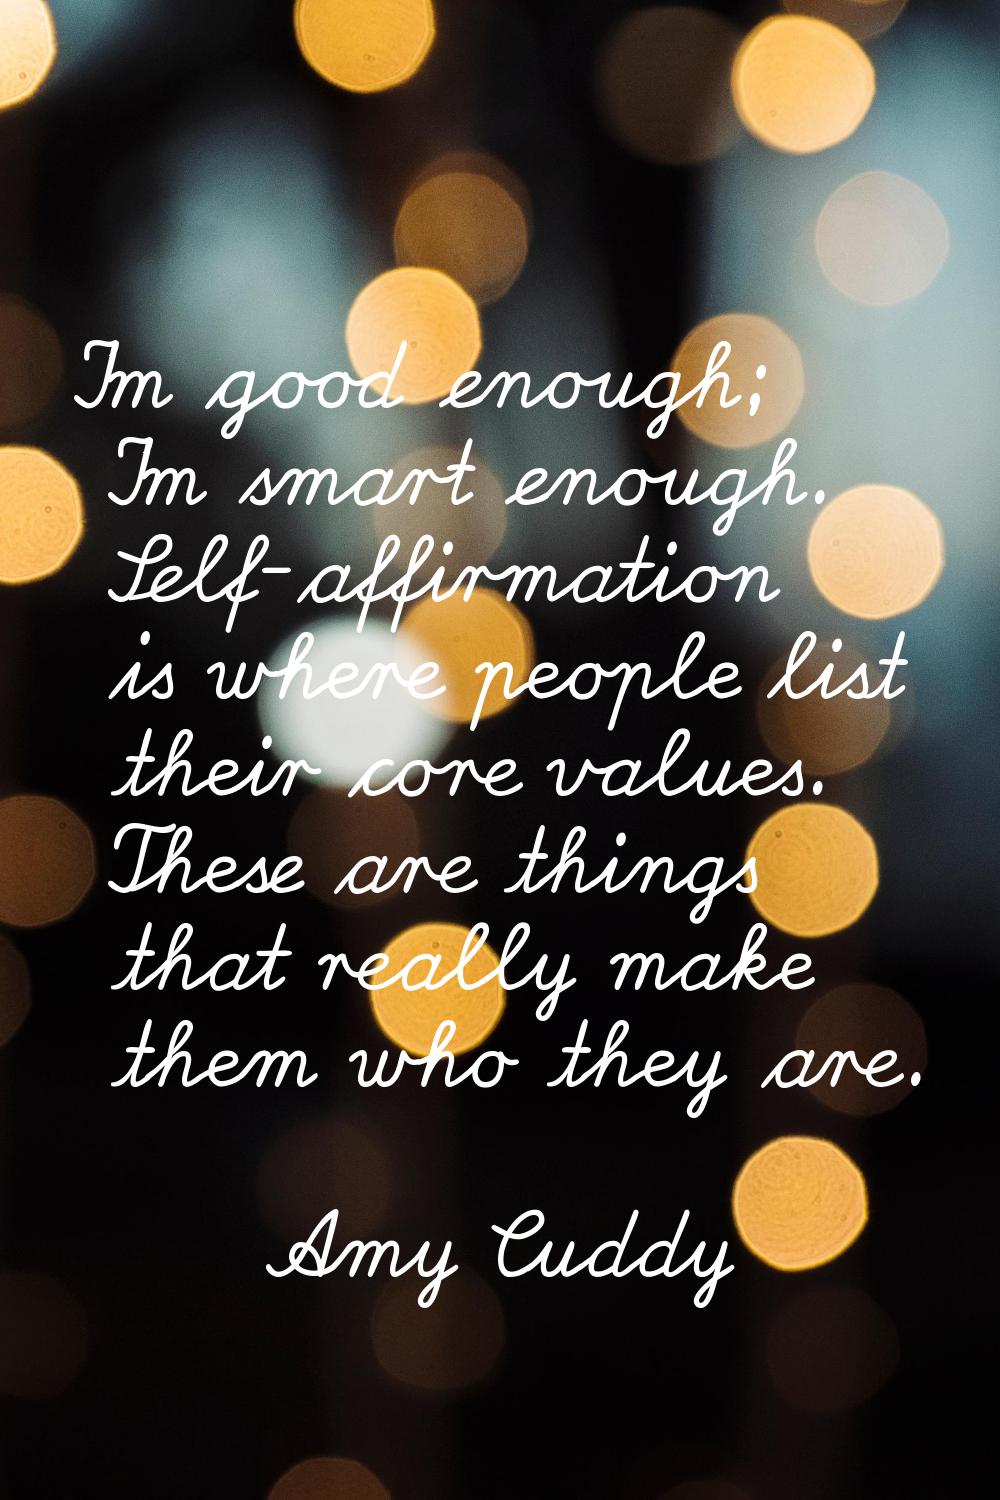 I'm good enough; I'm smart enough. Self-affirmation is where people list their core values. These a